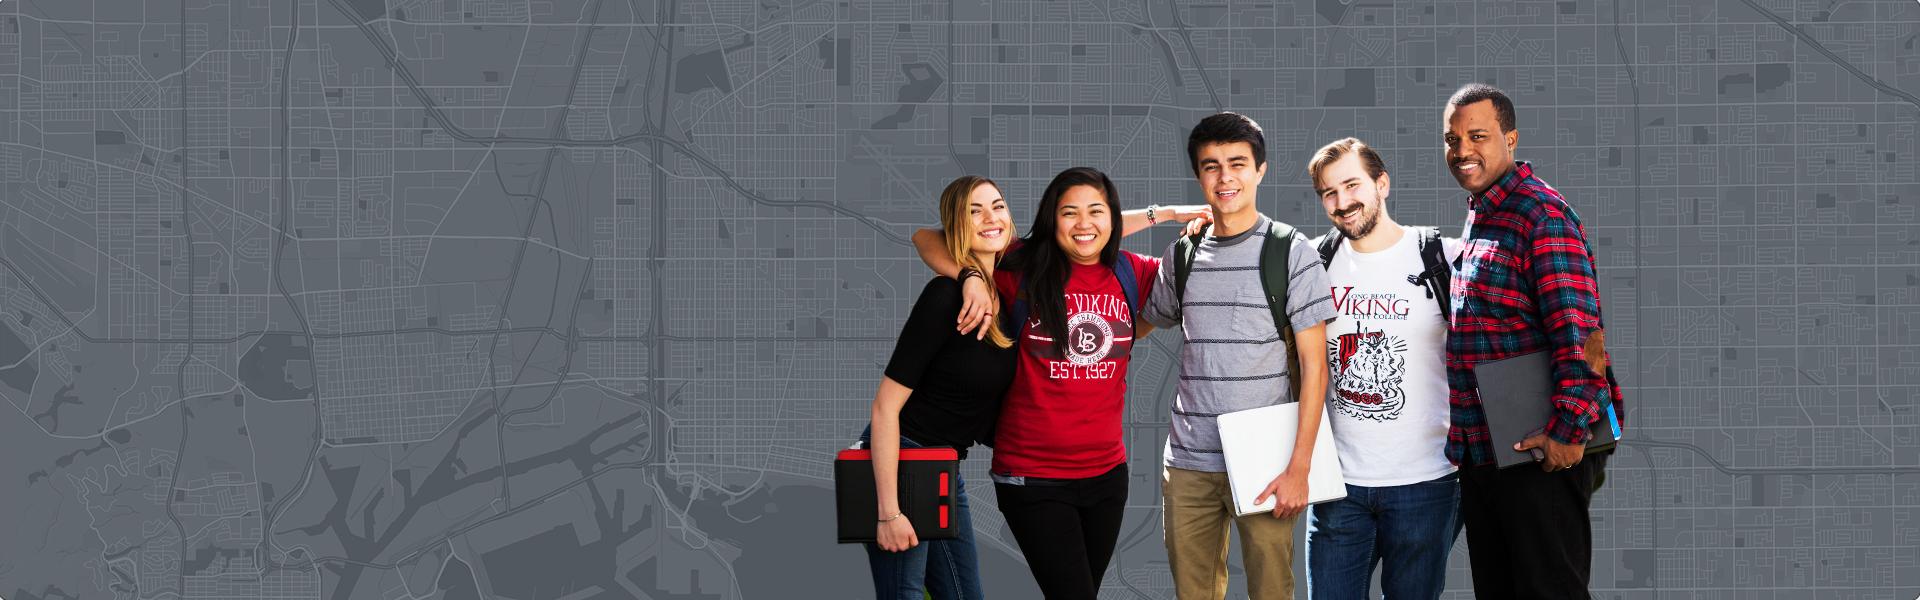 LBCC Strategic Plan background with Lakewood map and LBCC students